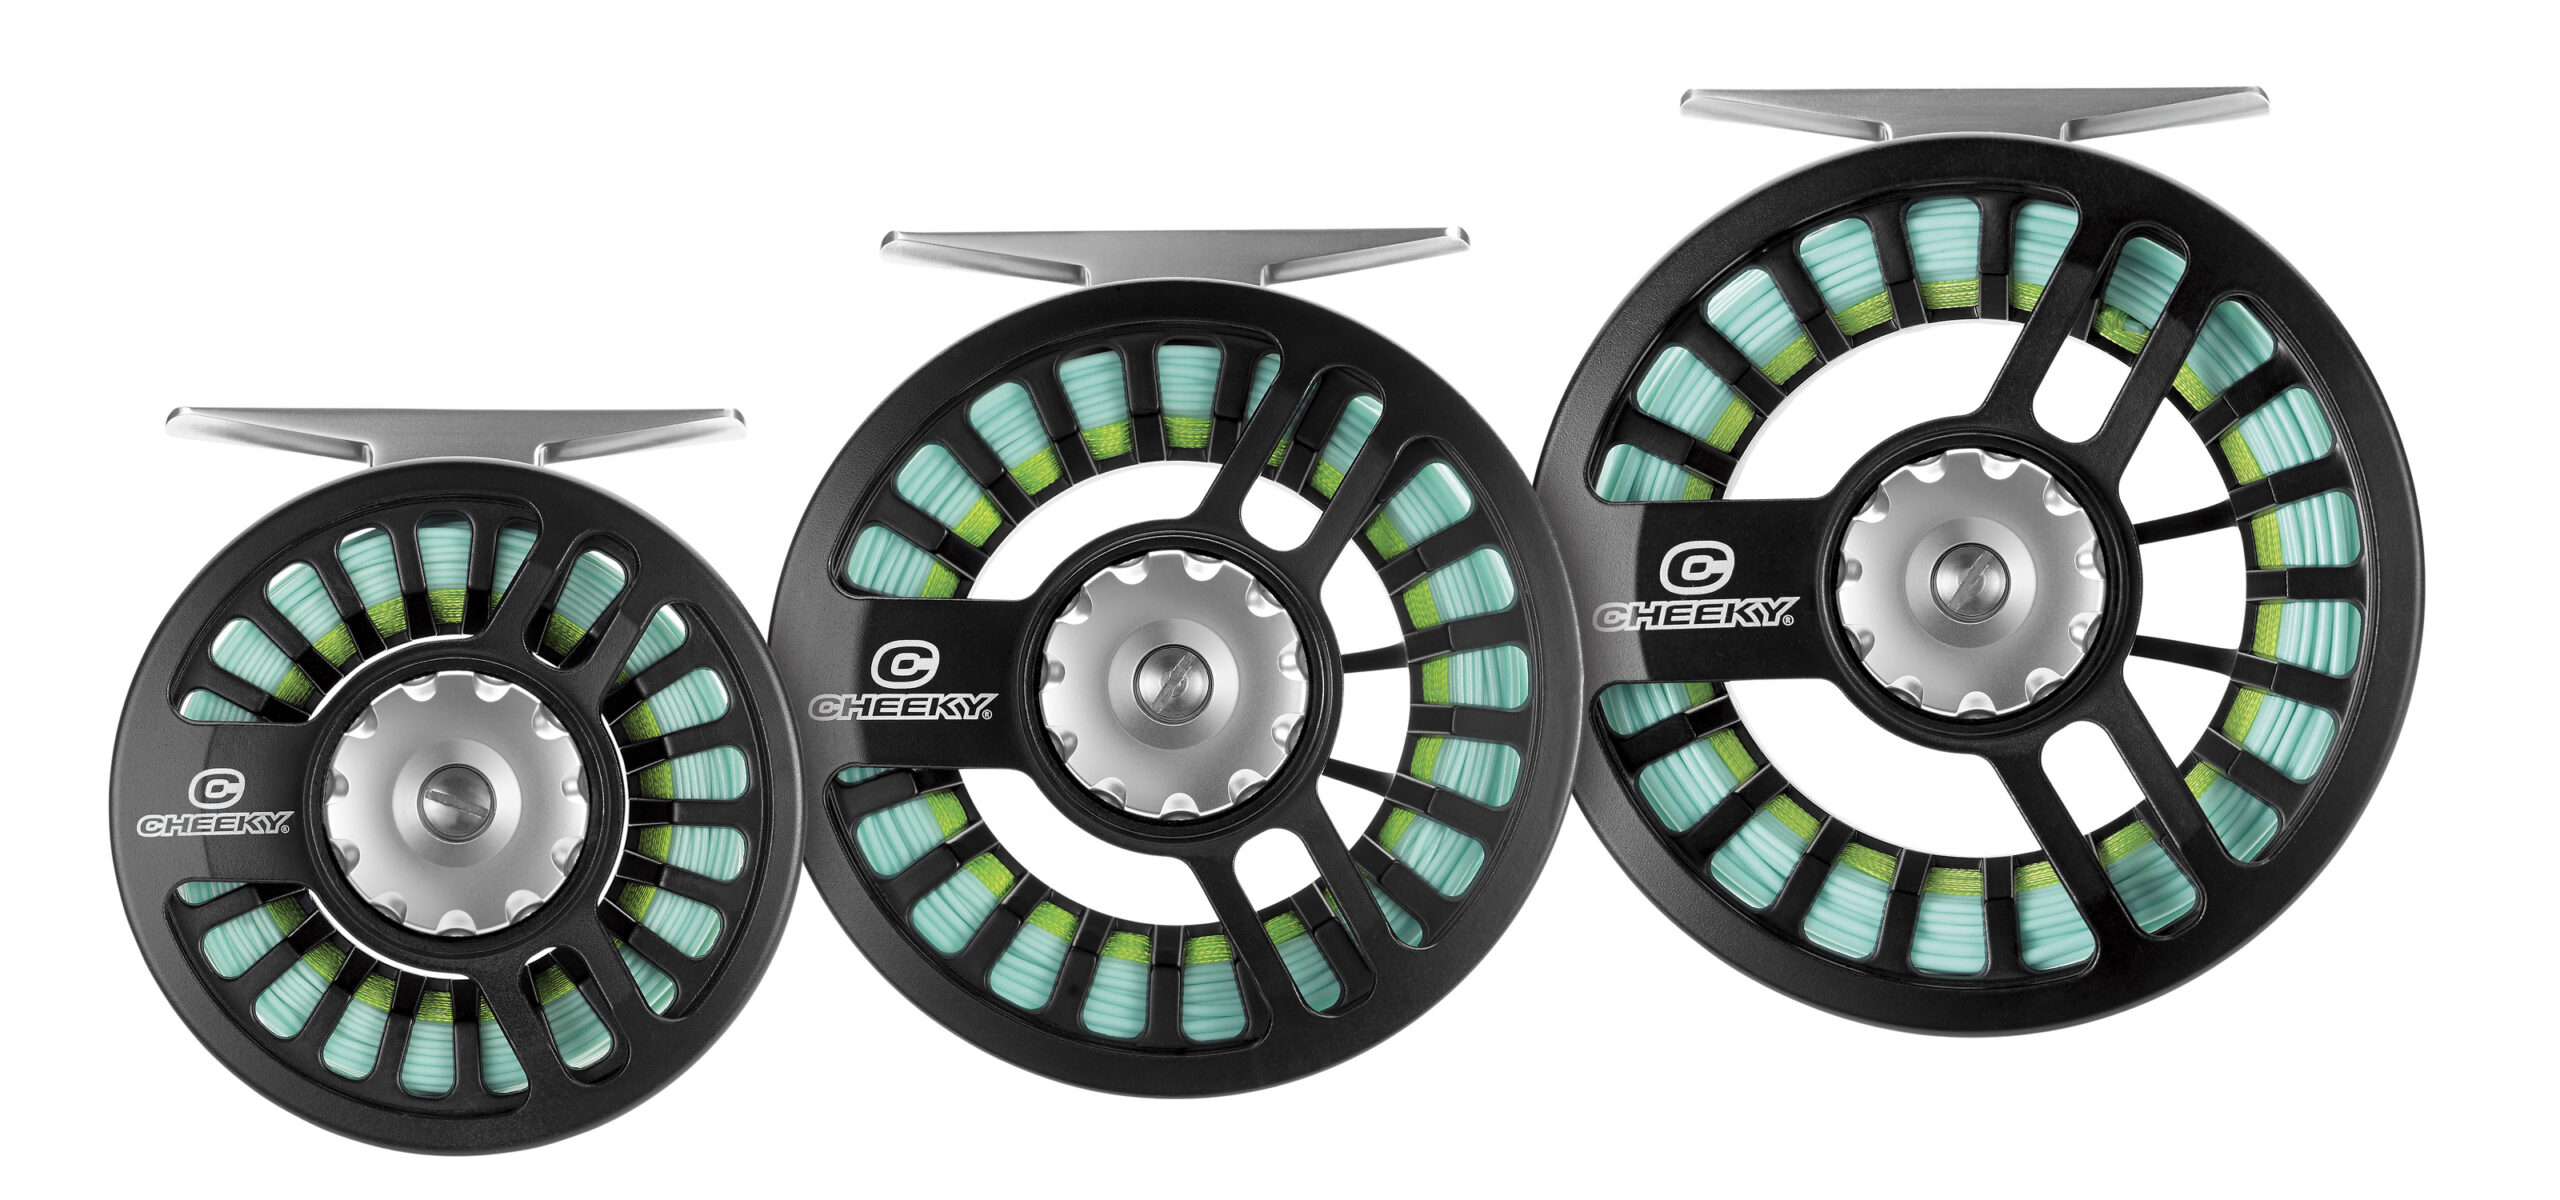 Cheeky PreLoad Reel - $99.99 : Waters West Fly Fishing Outfitters